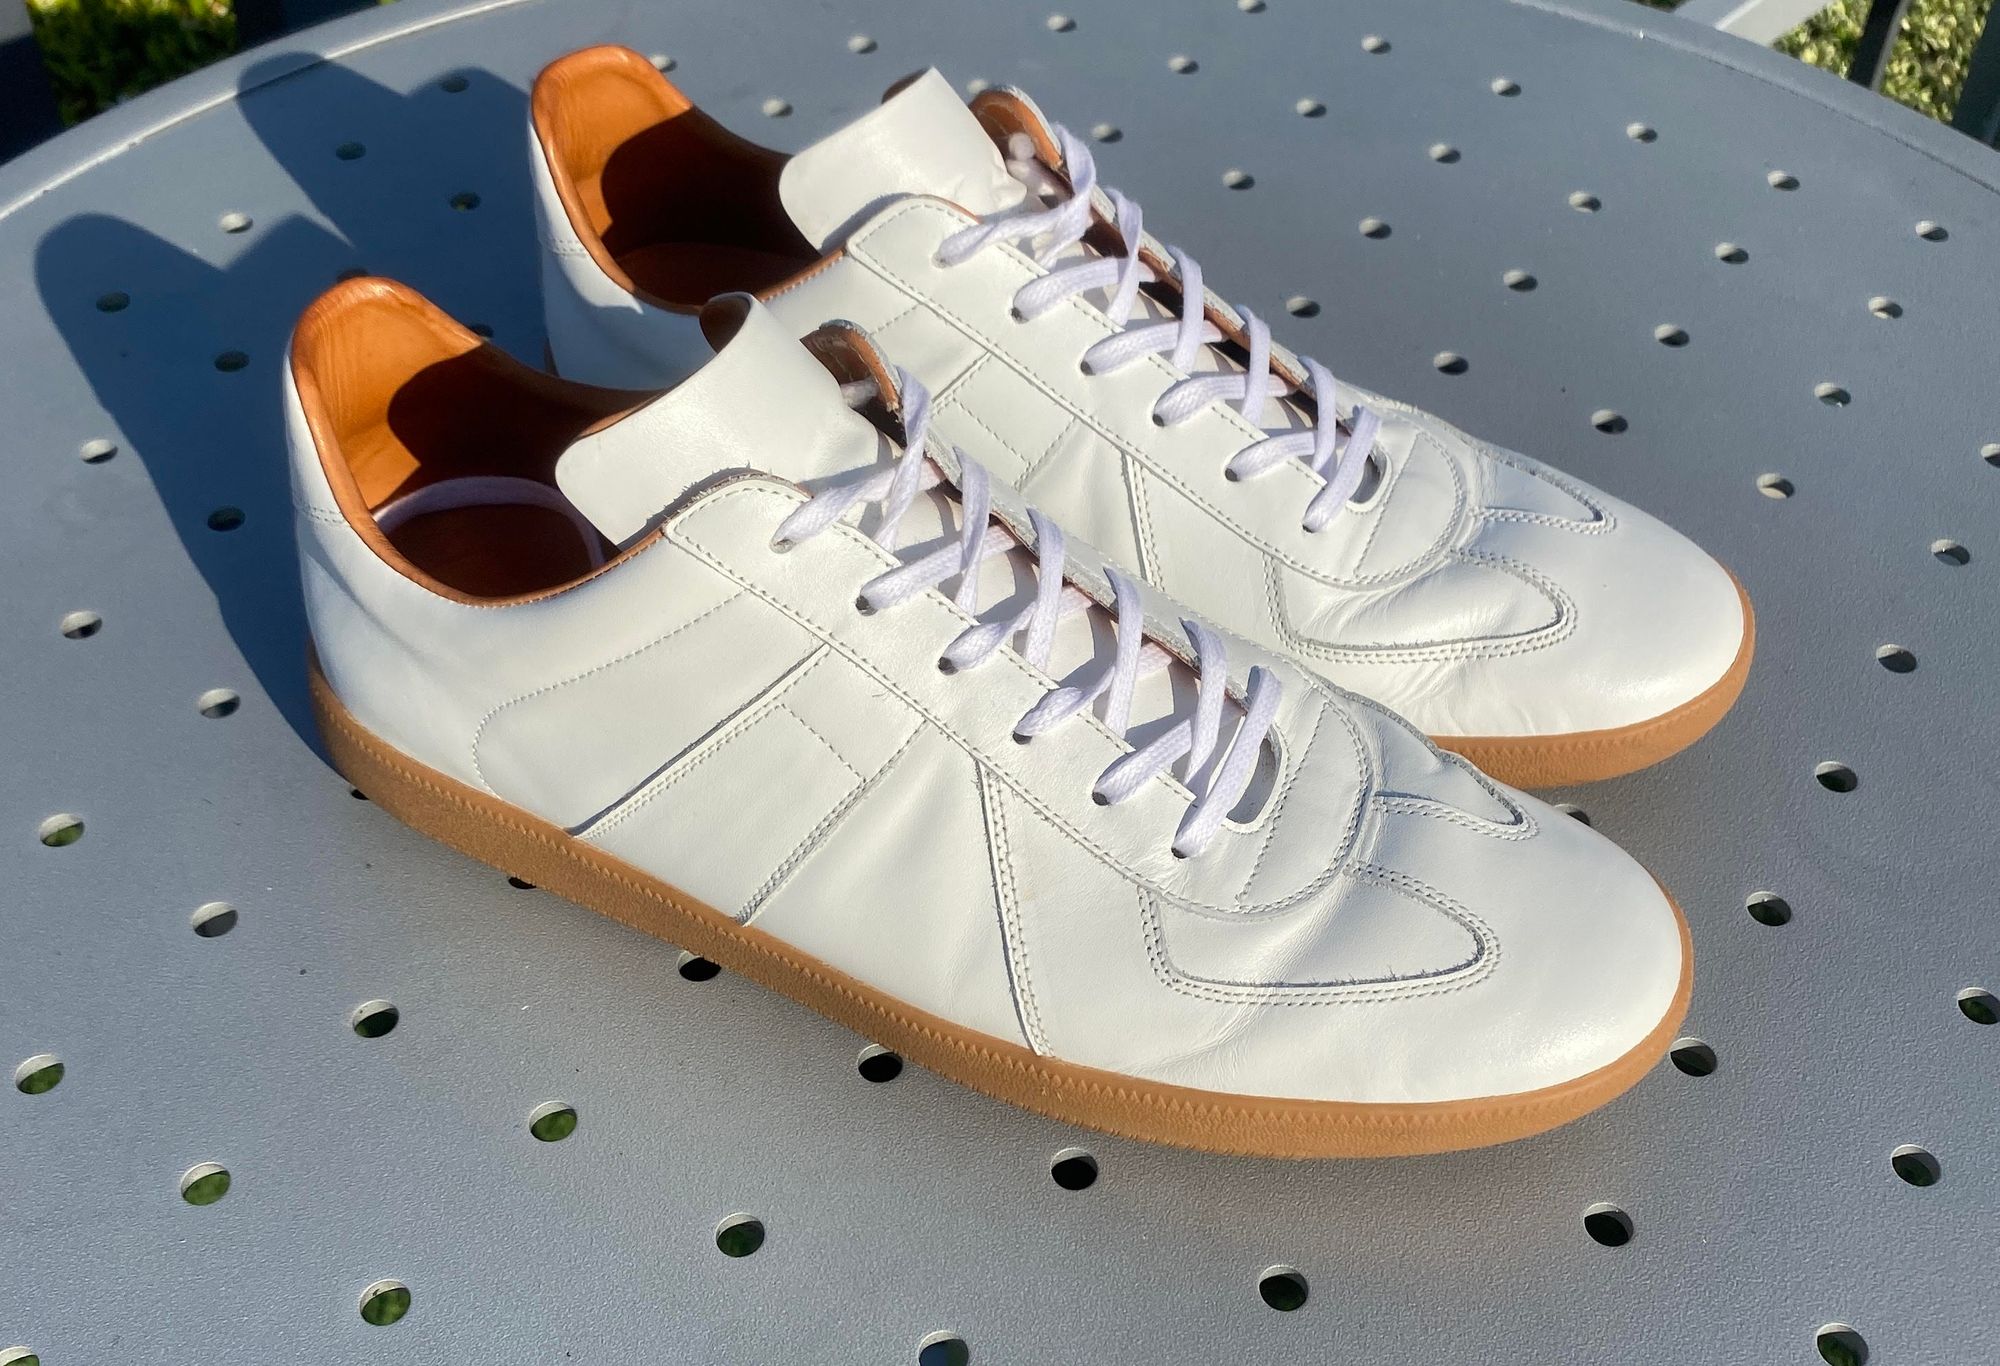 Beckett Simonon Morgen Trainers Review: A Quality GAT Well Worth the Wait